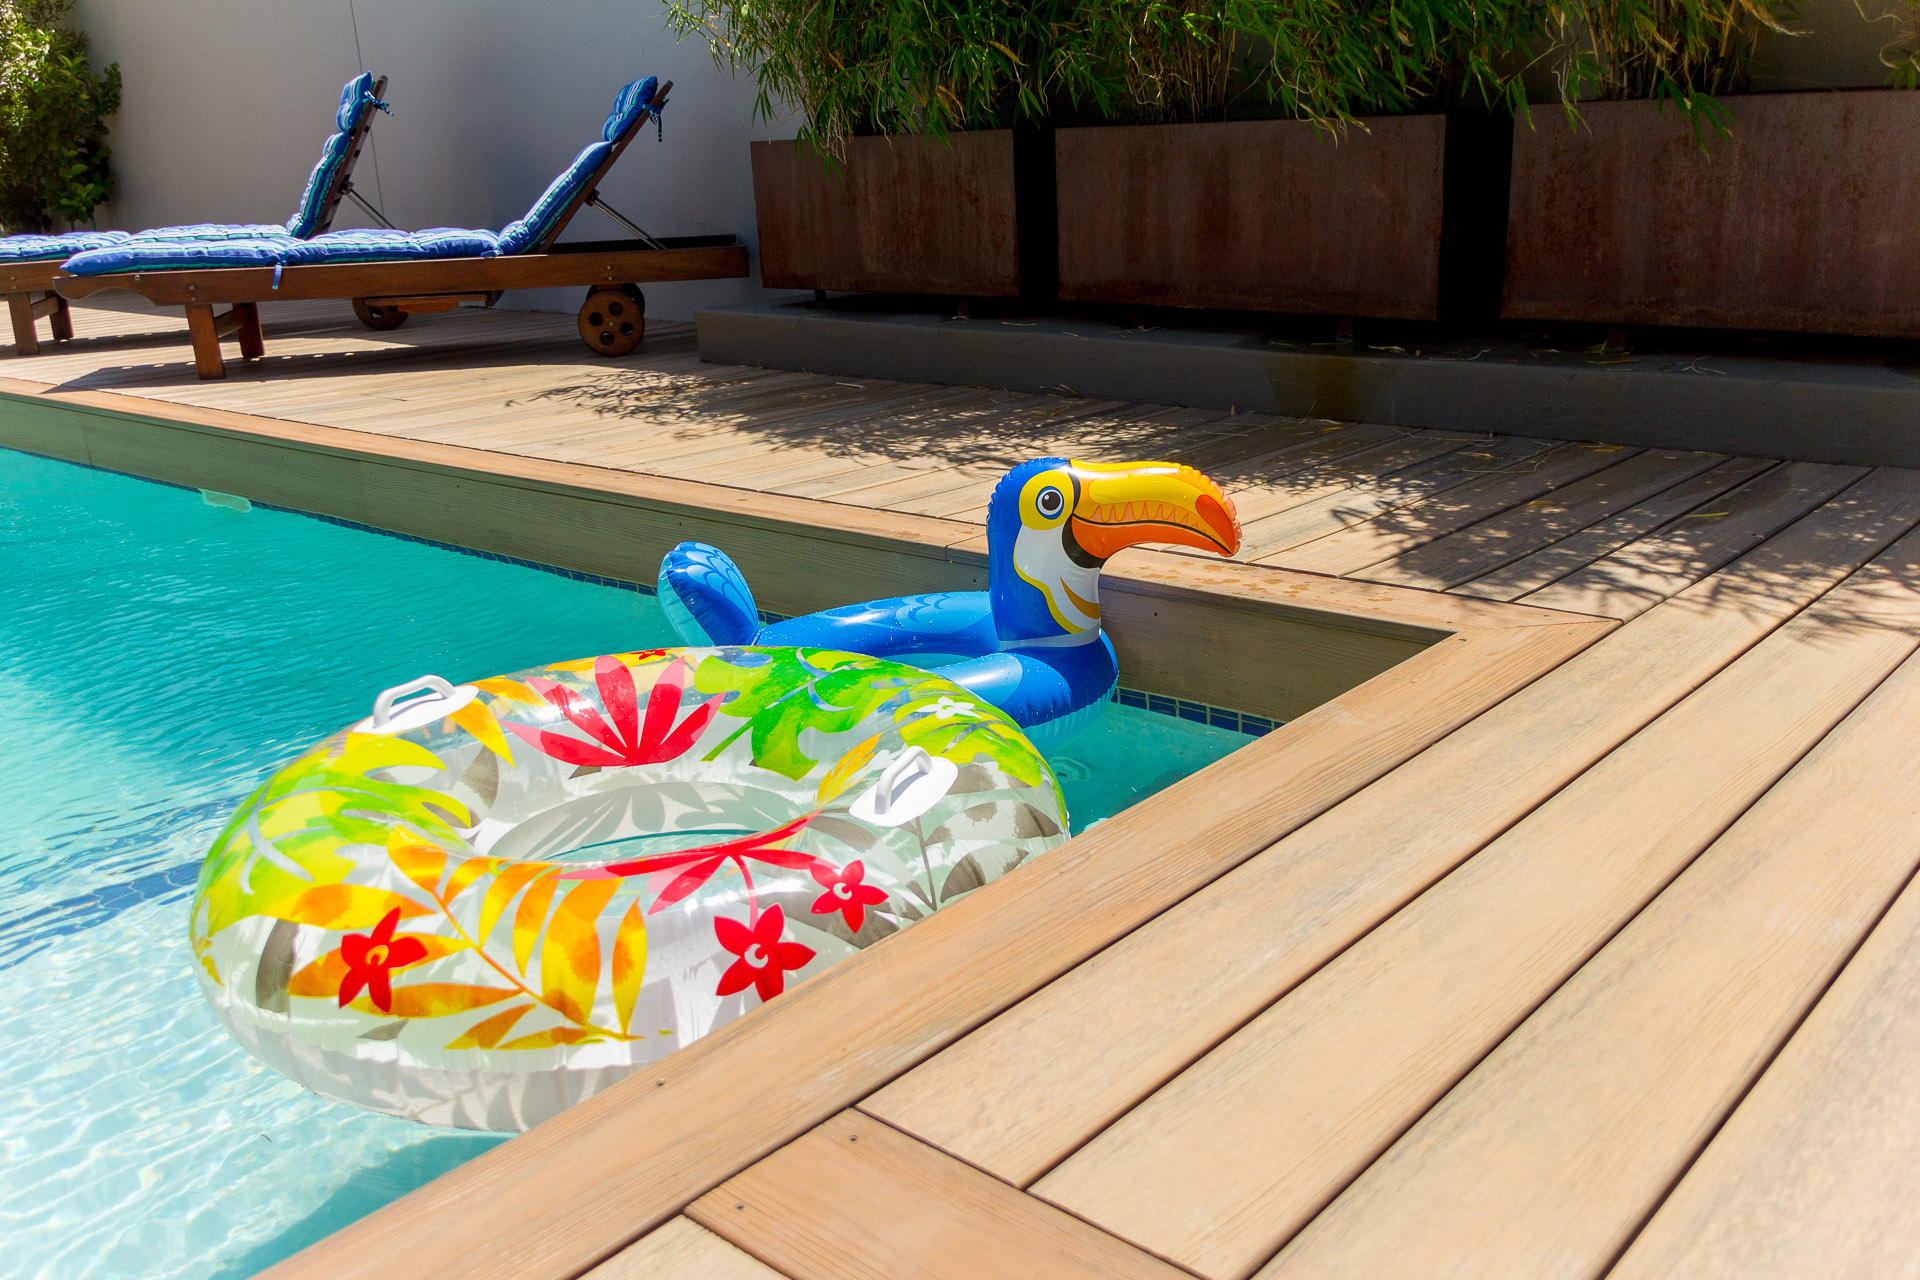 Floating pool toys bump up against light brown composite decking.